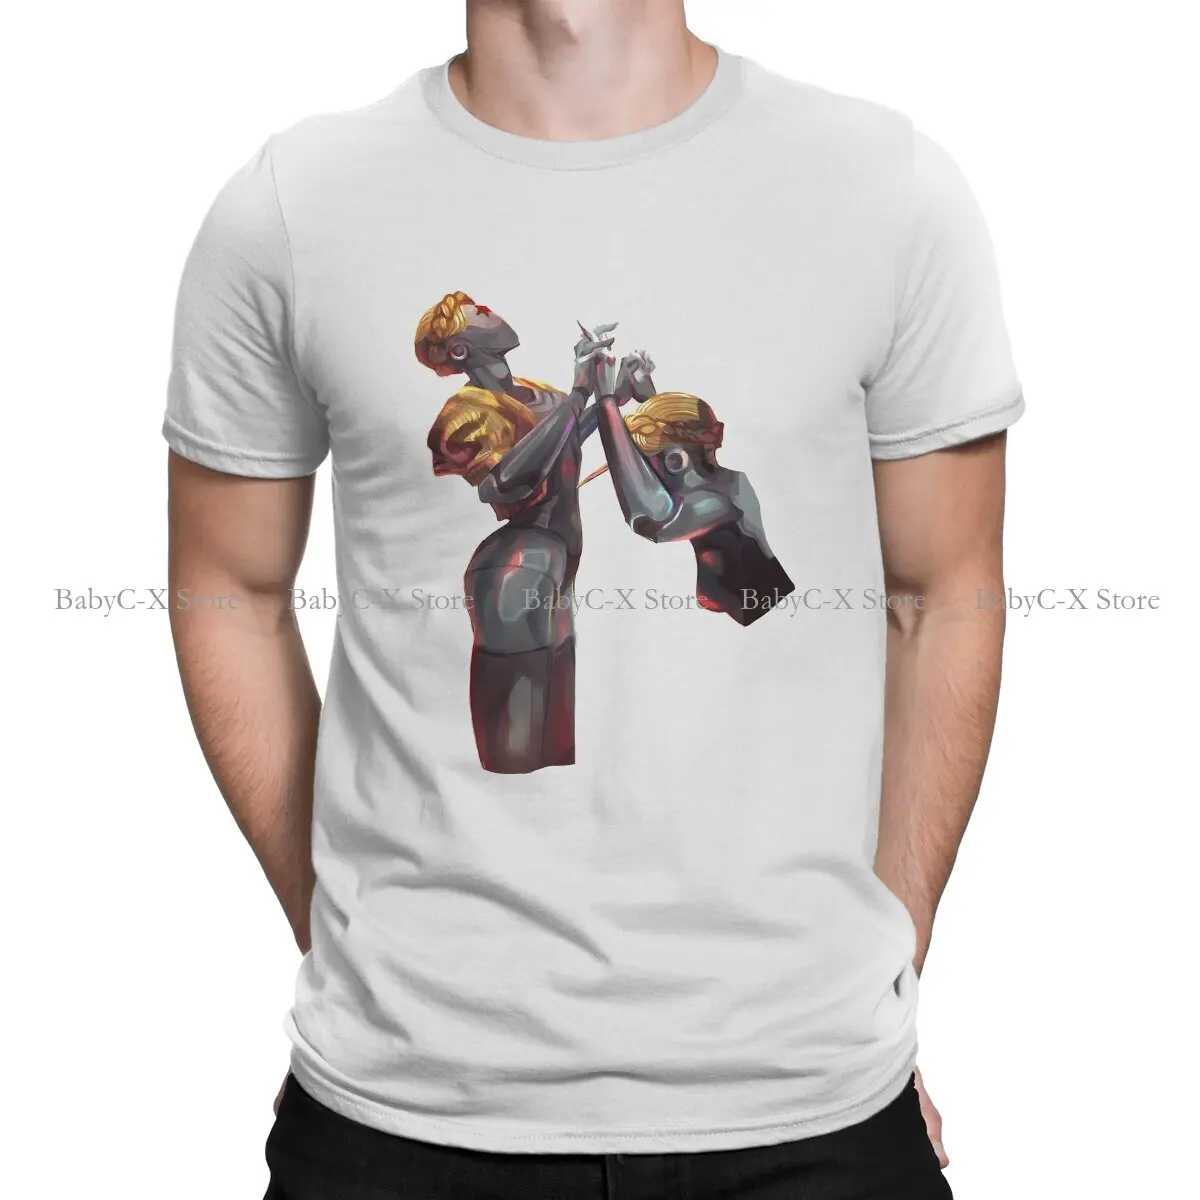 

Atomic Heart Robot Twins USSR Russia Russian FPS Game Polyester TShirts Dancing Personalize Homme T Shirt New Trend Tops